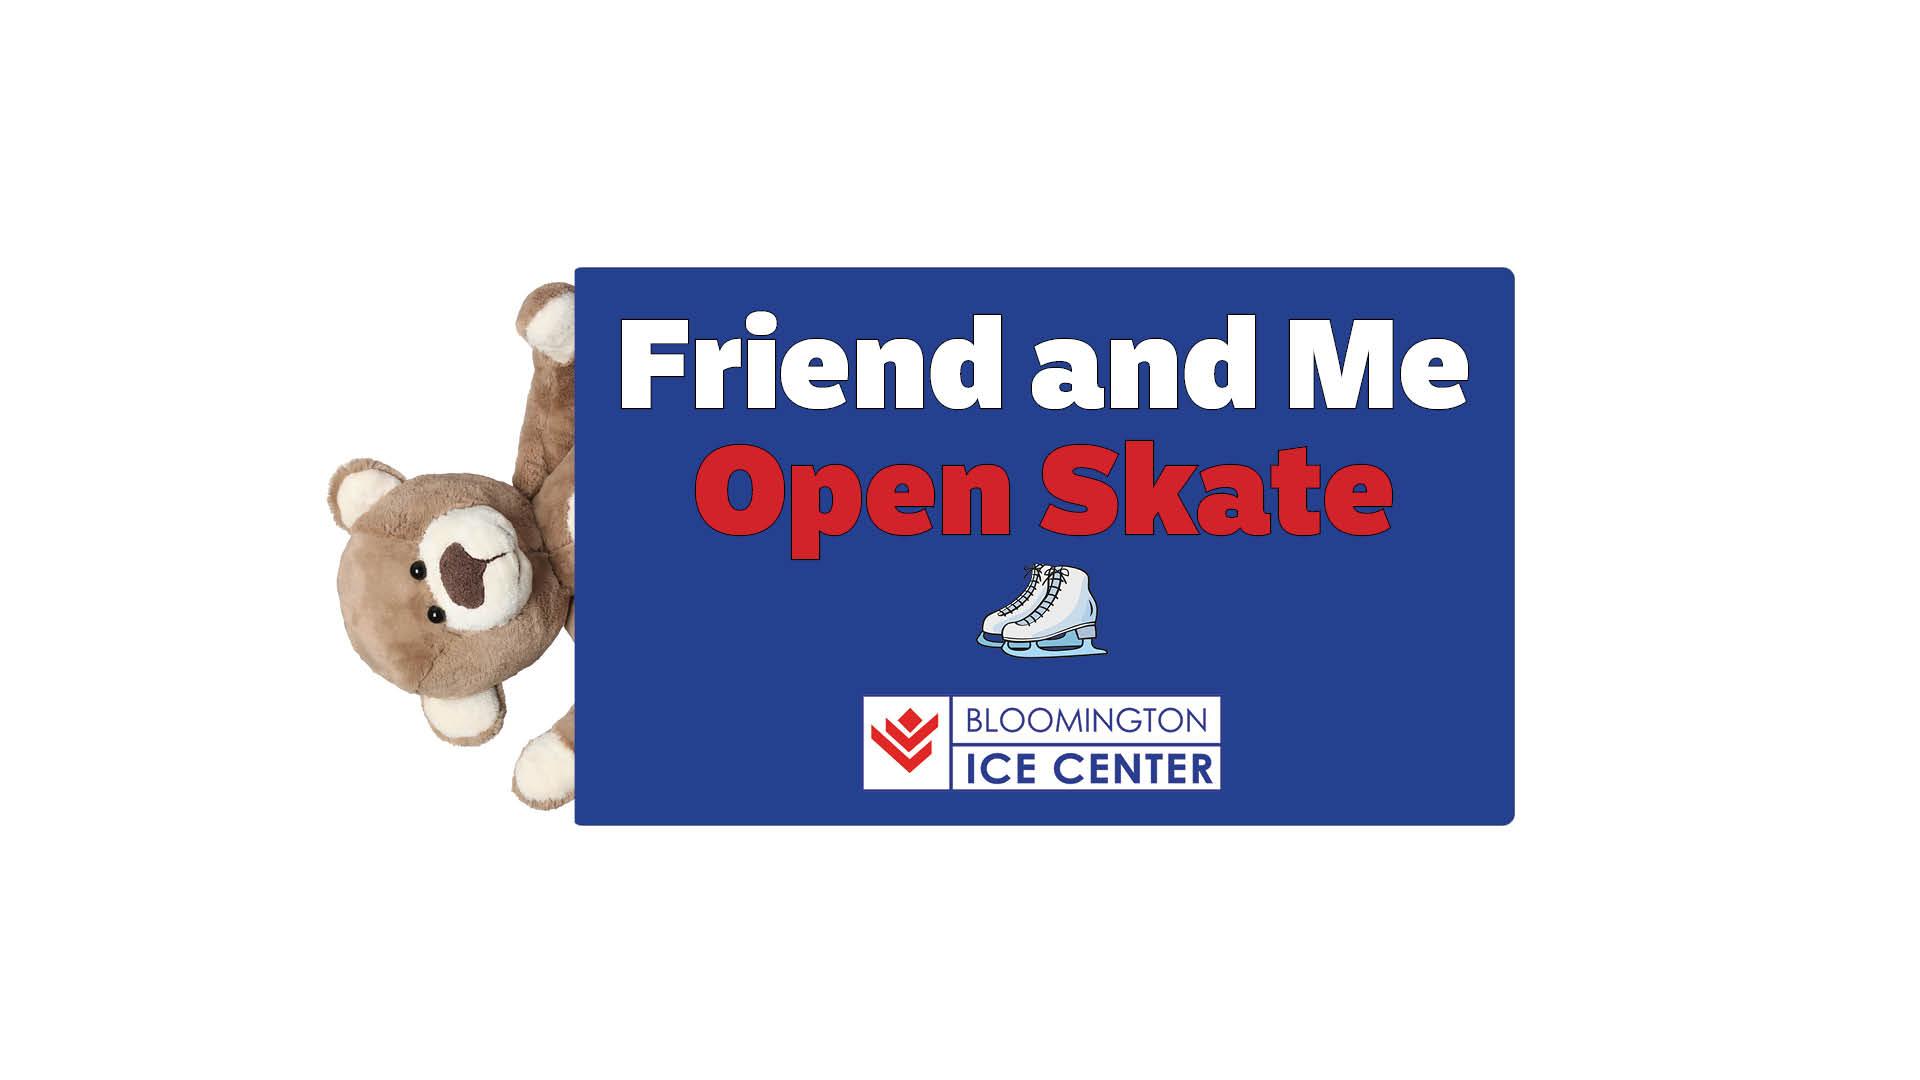 Friend and Me Open Skate at Bloomington Ice Center